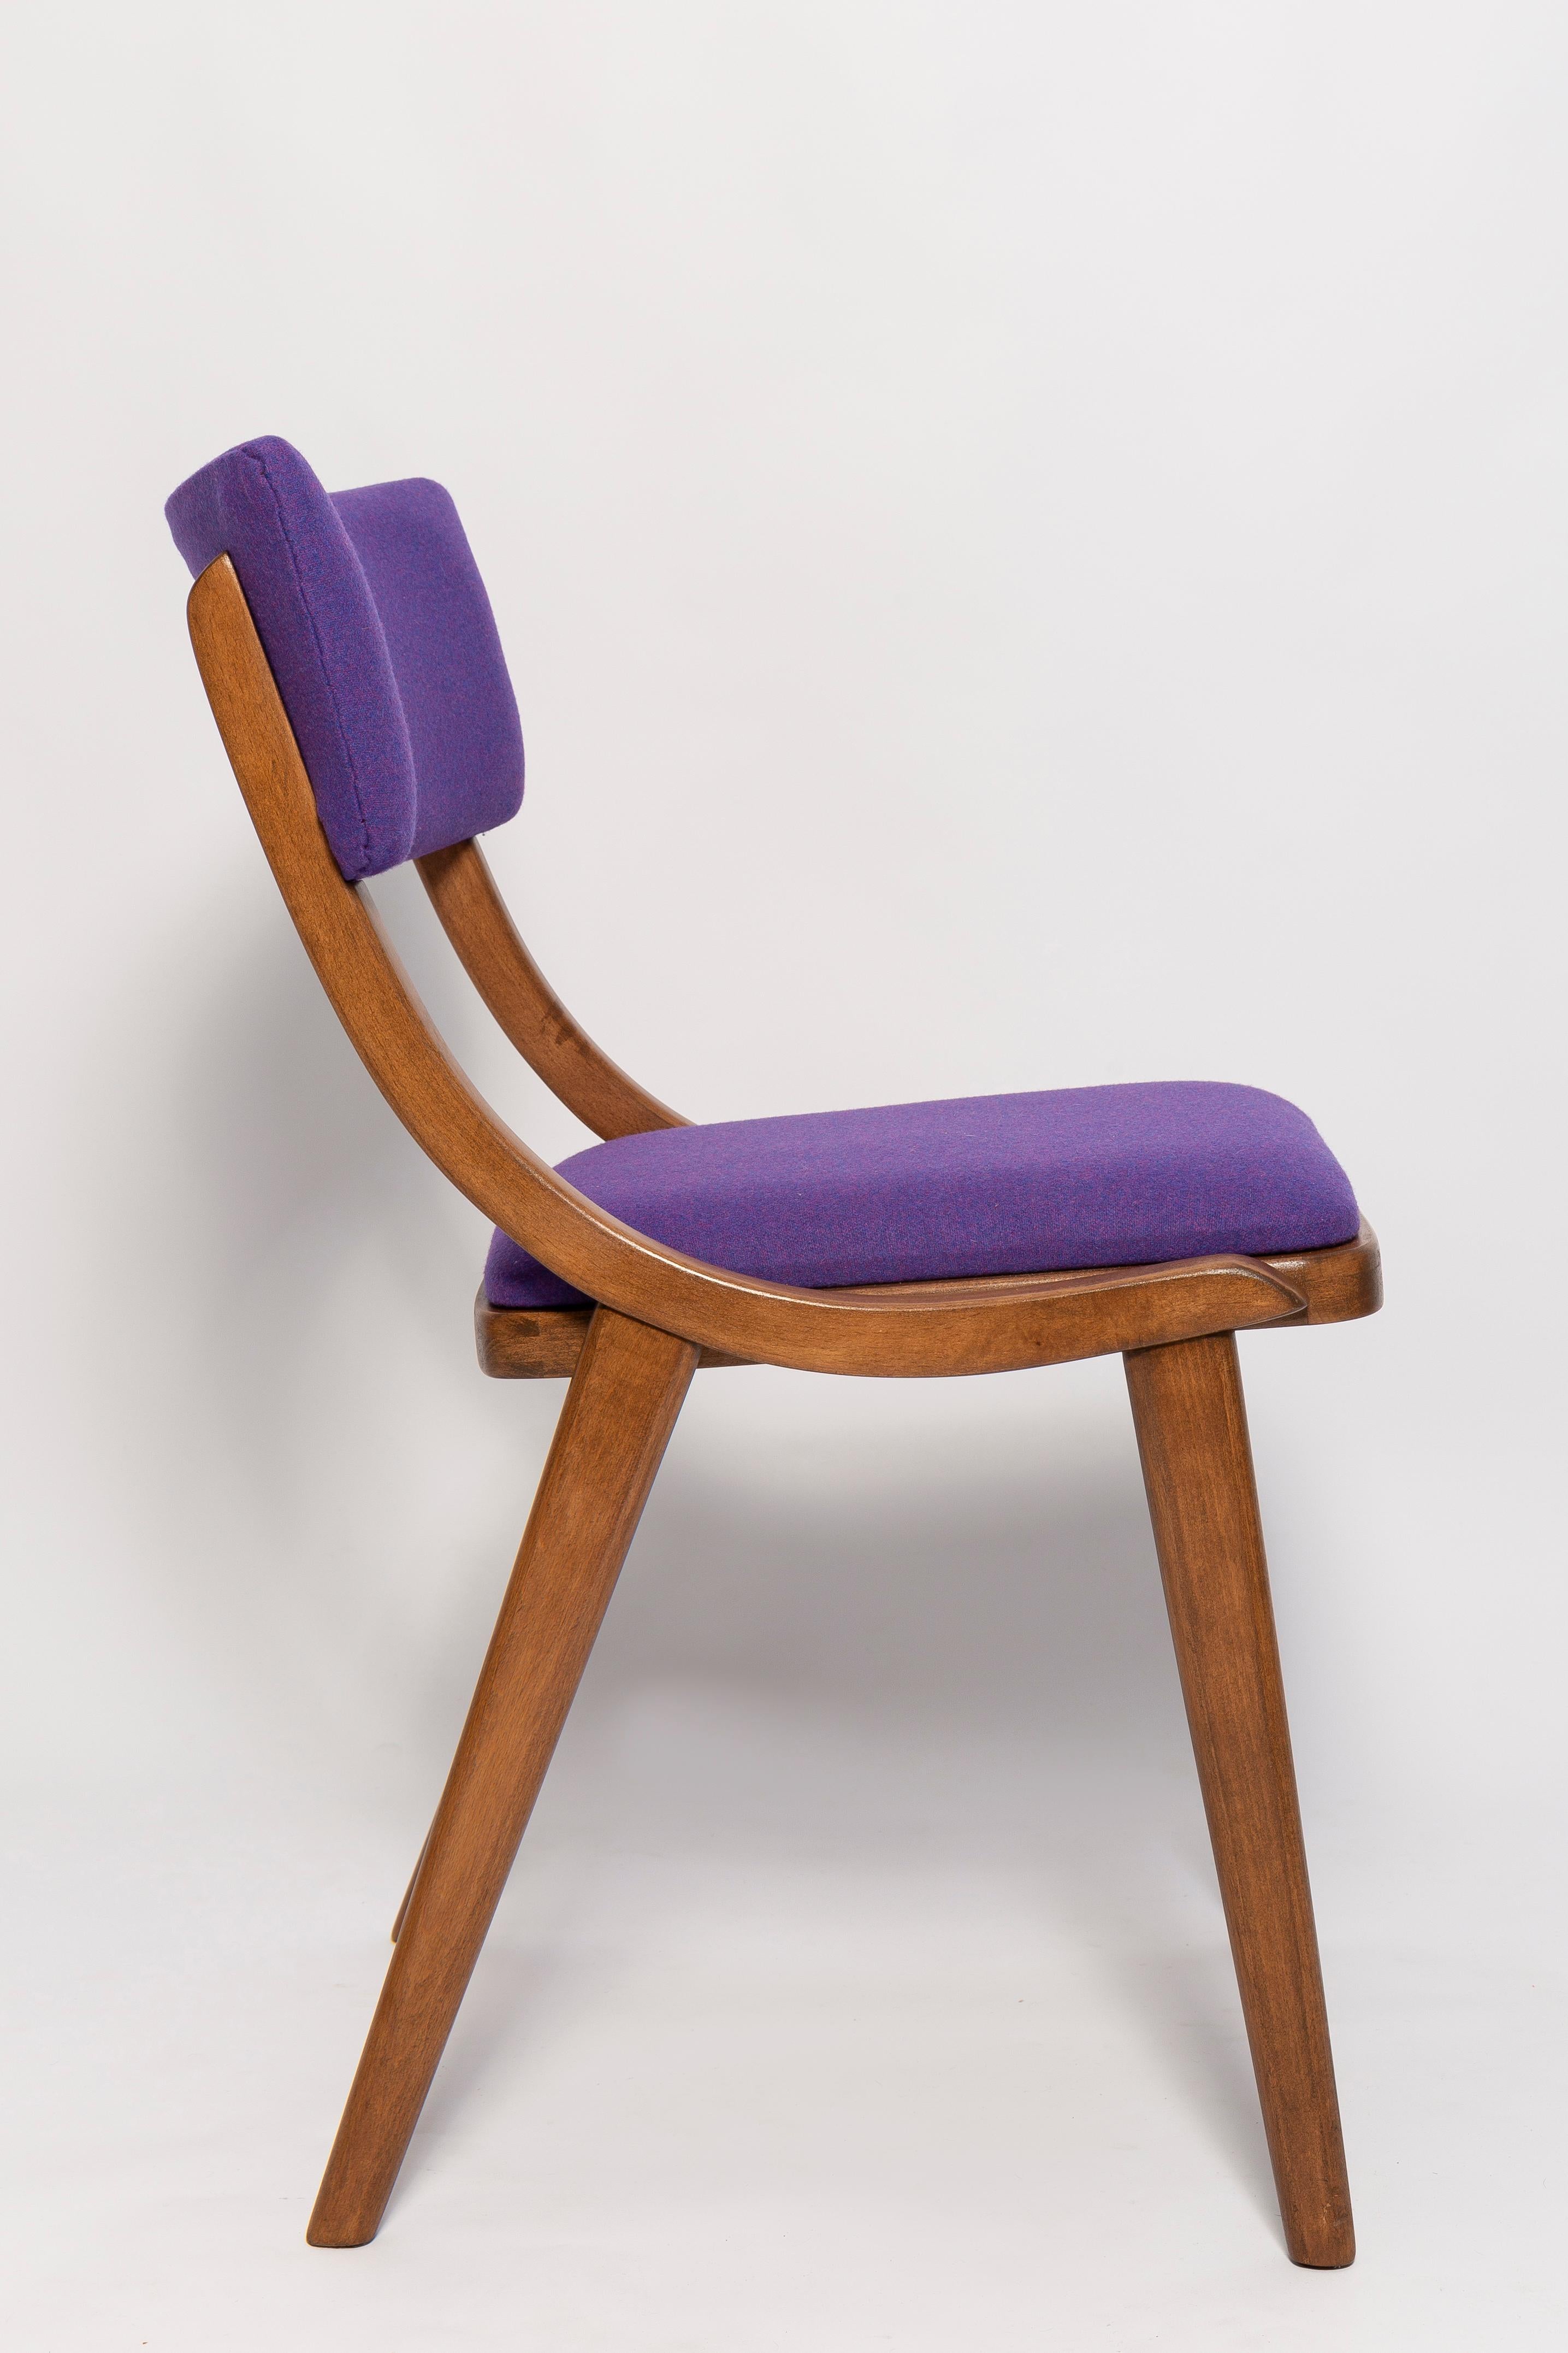 Textile Six Mid Century Modern Bumerang Chairs, Purple Violet Wool, Poland, 1960s For Sale